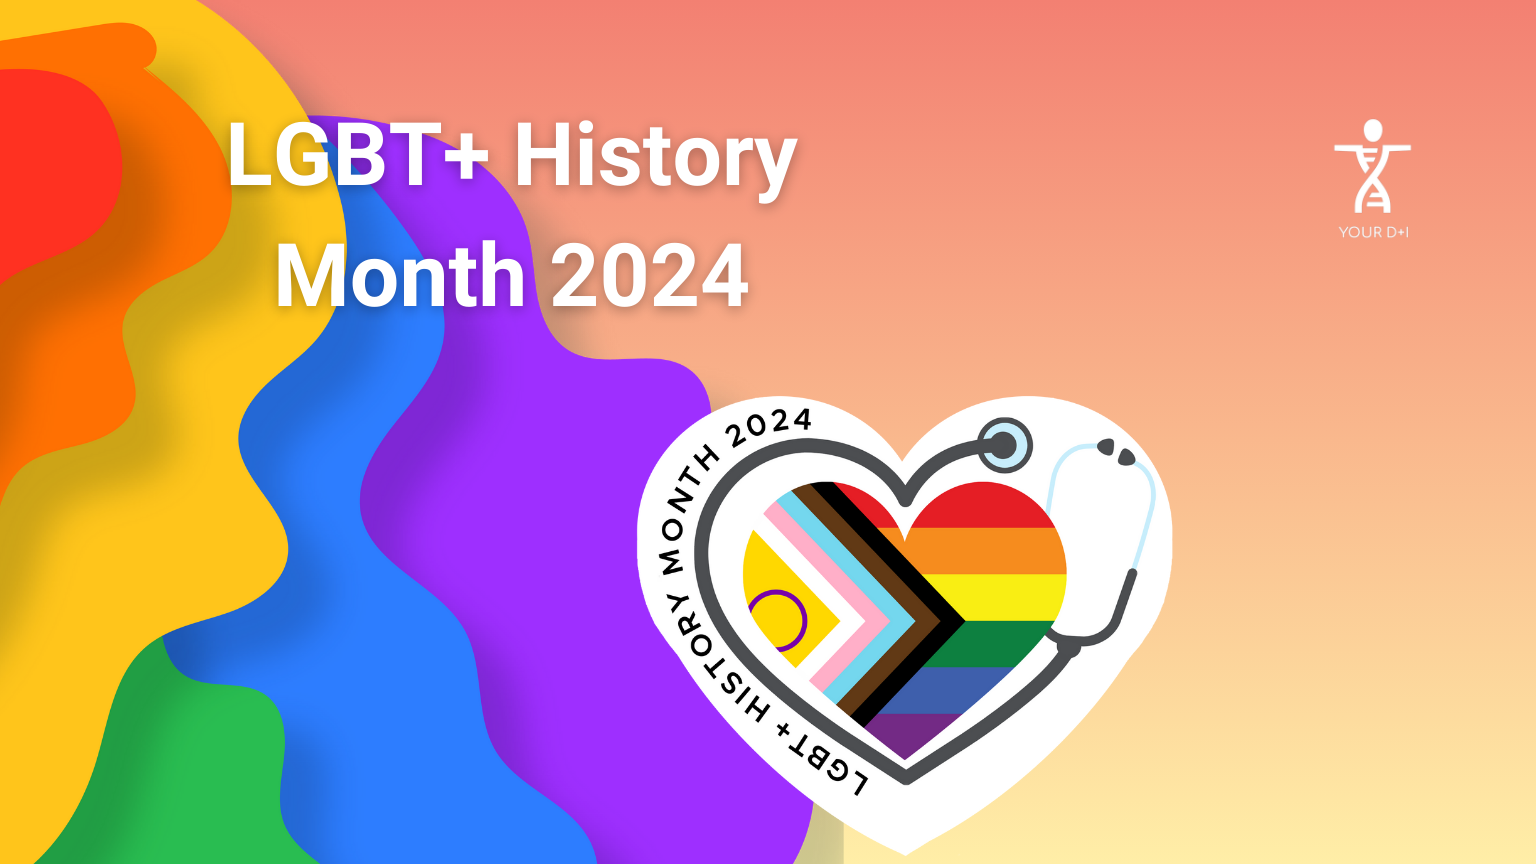 lgbt+ history month celebrating medicine. Logo showing pride colours and a stethoscope.